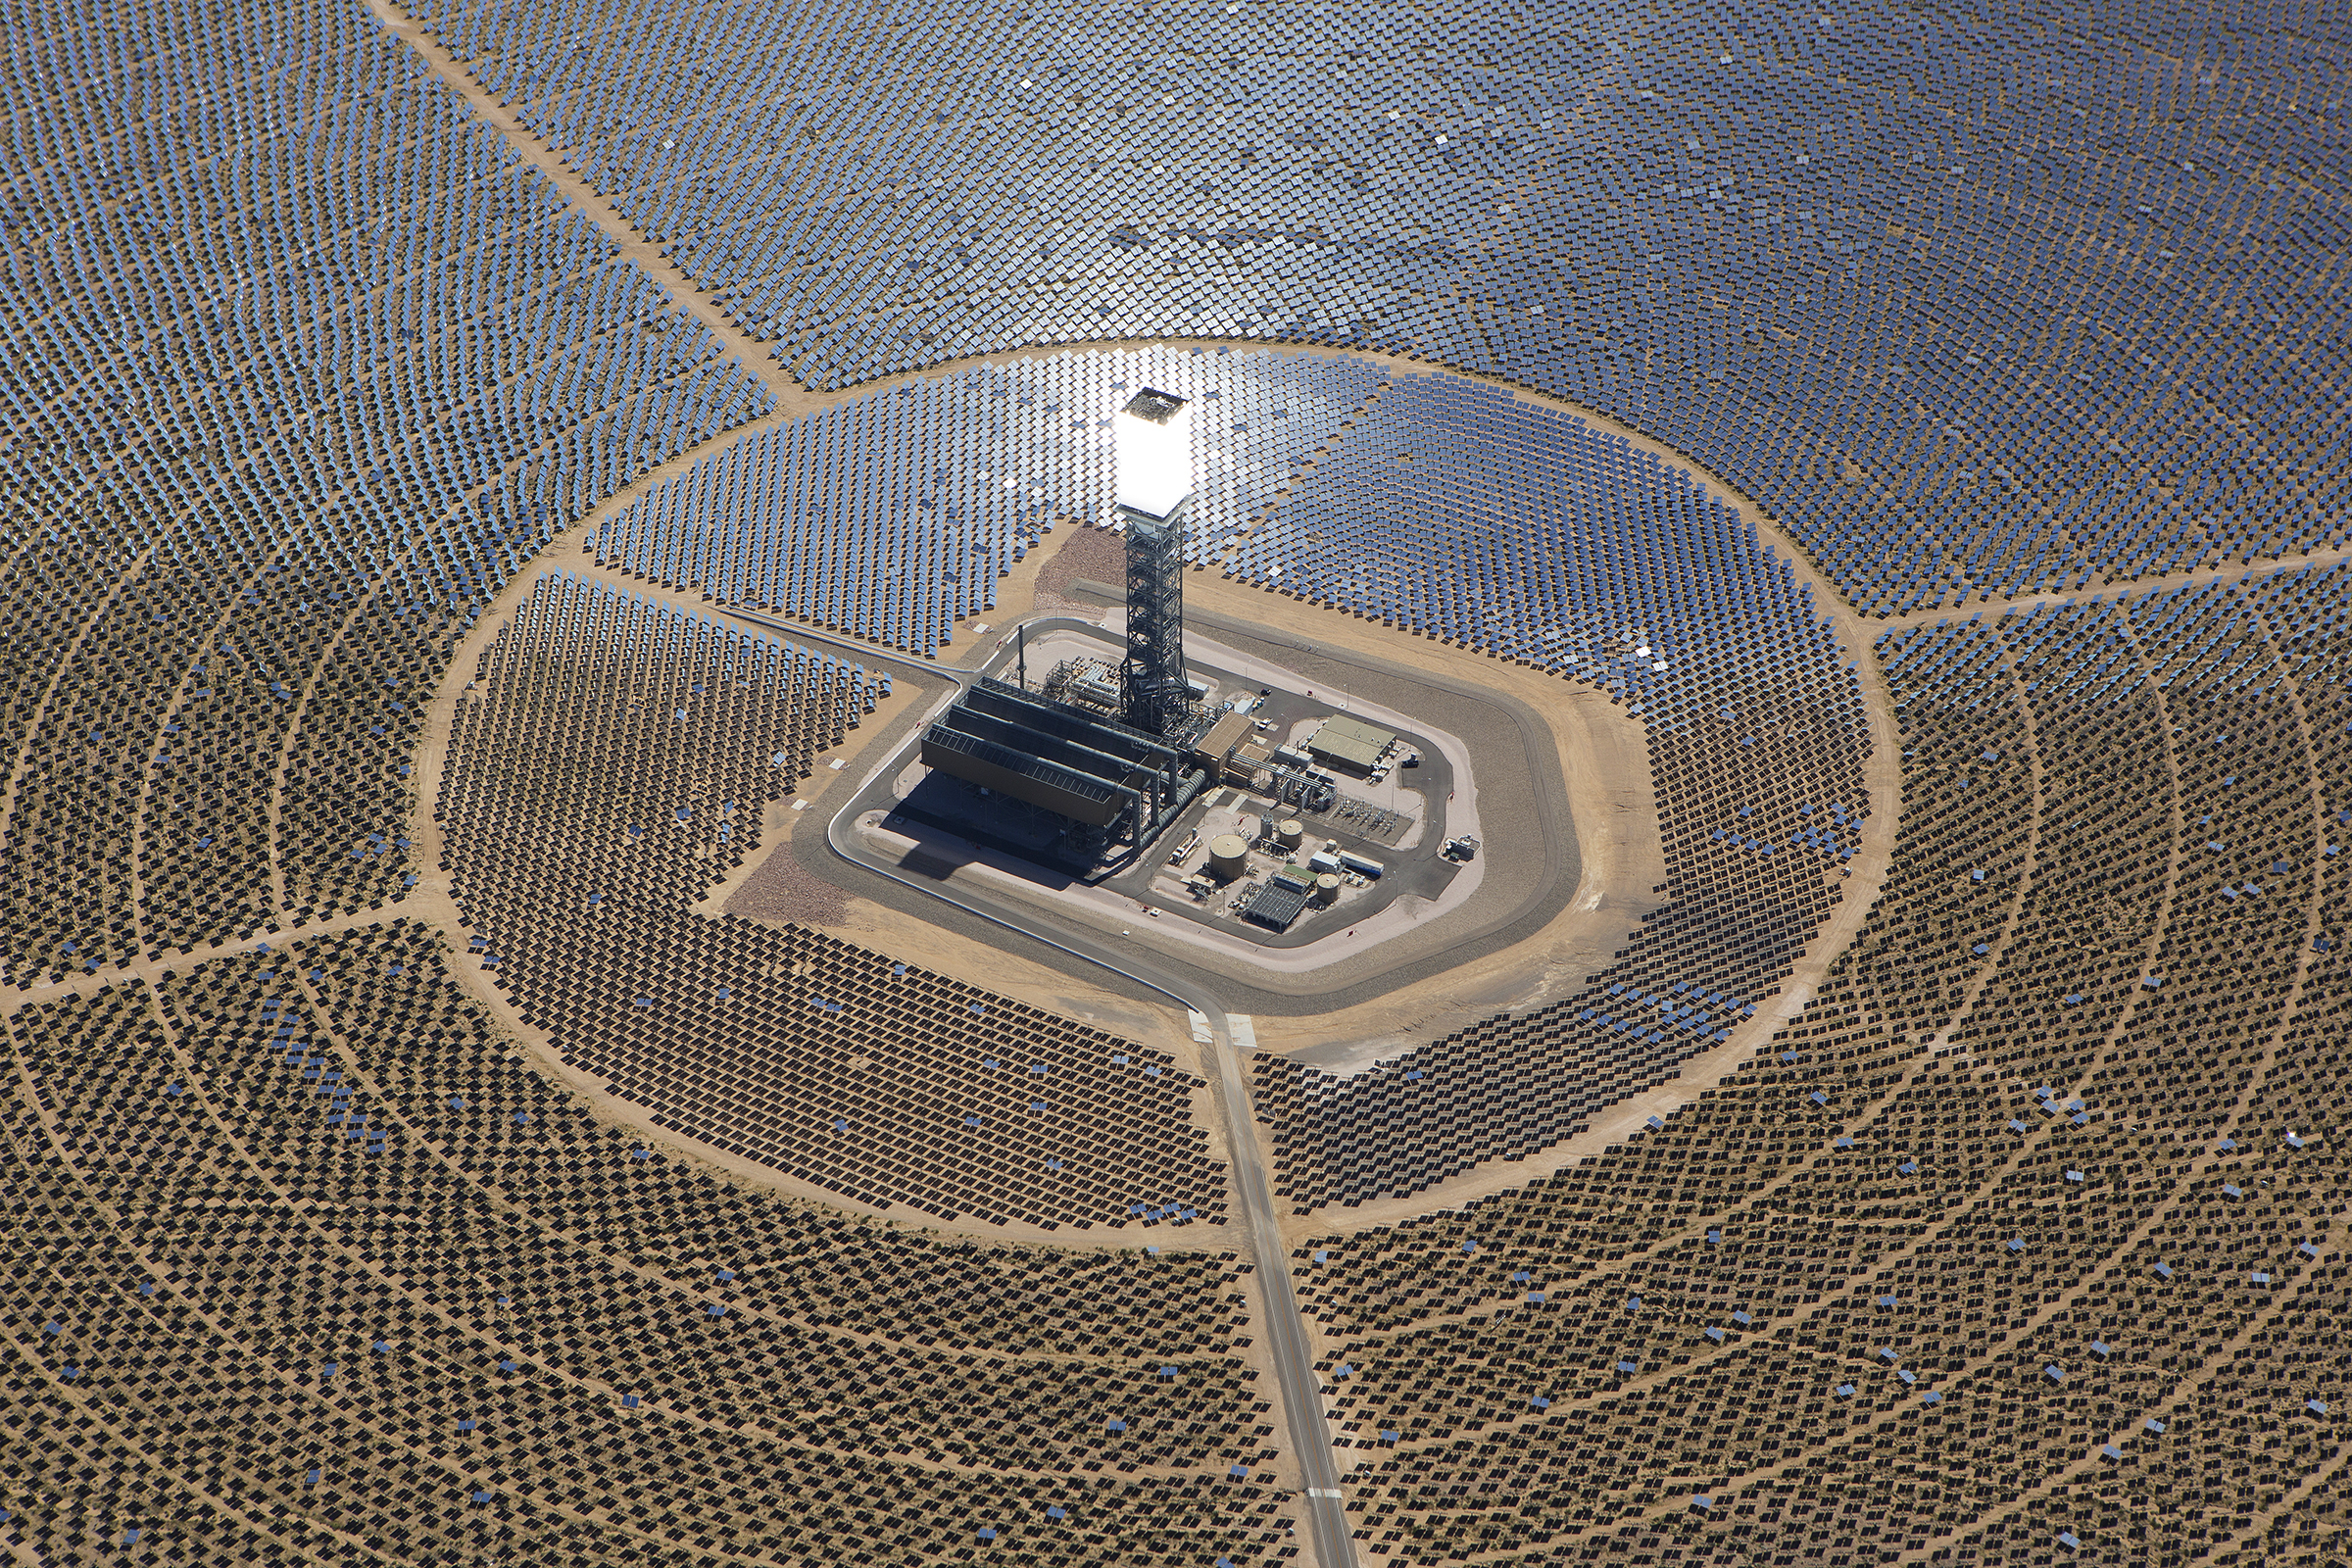 south-africa-irp-no-allocation-for-concentrated-solar-power-csp